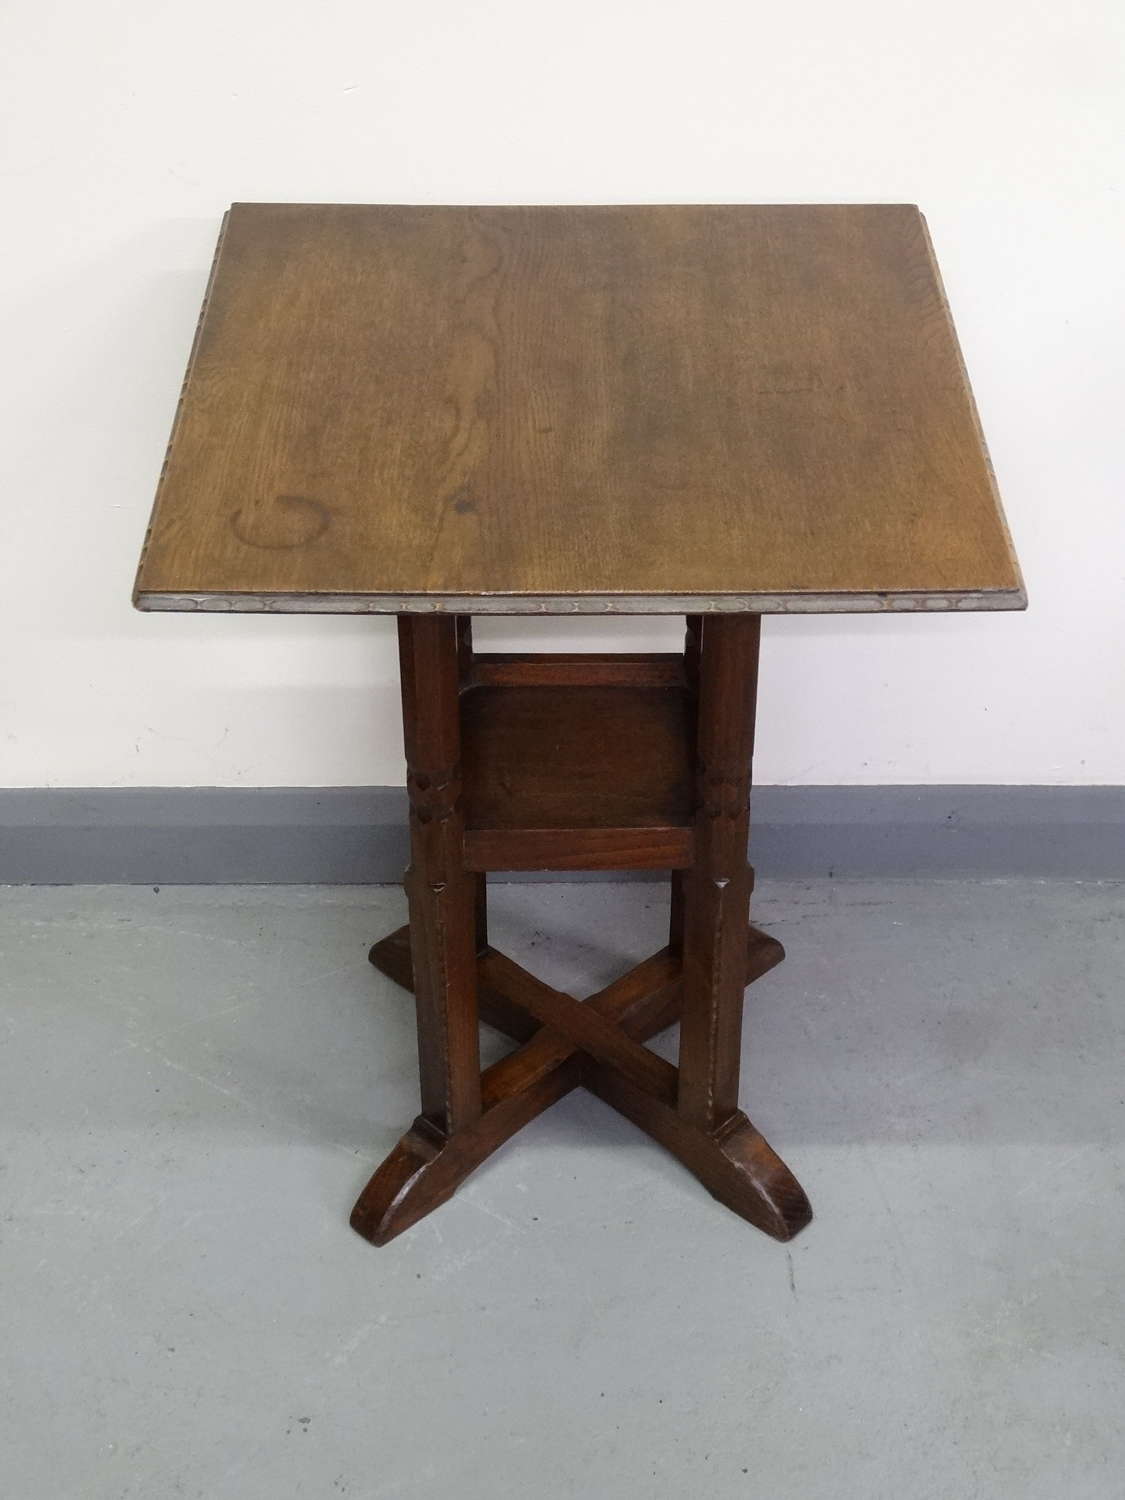 Cotswold School Arthur Romney Green occasional table